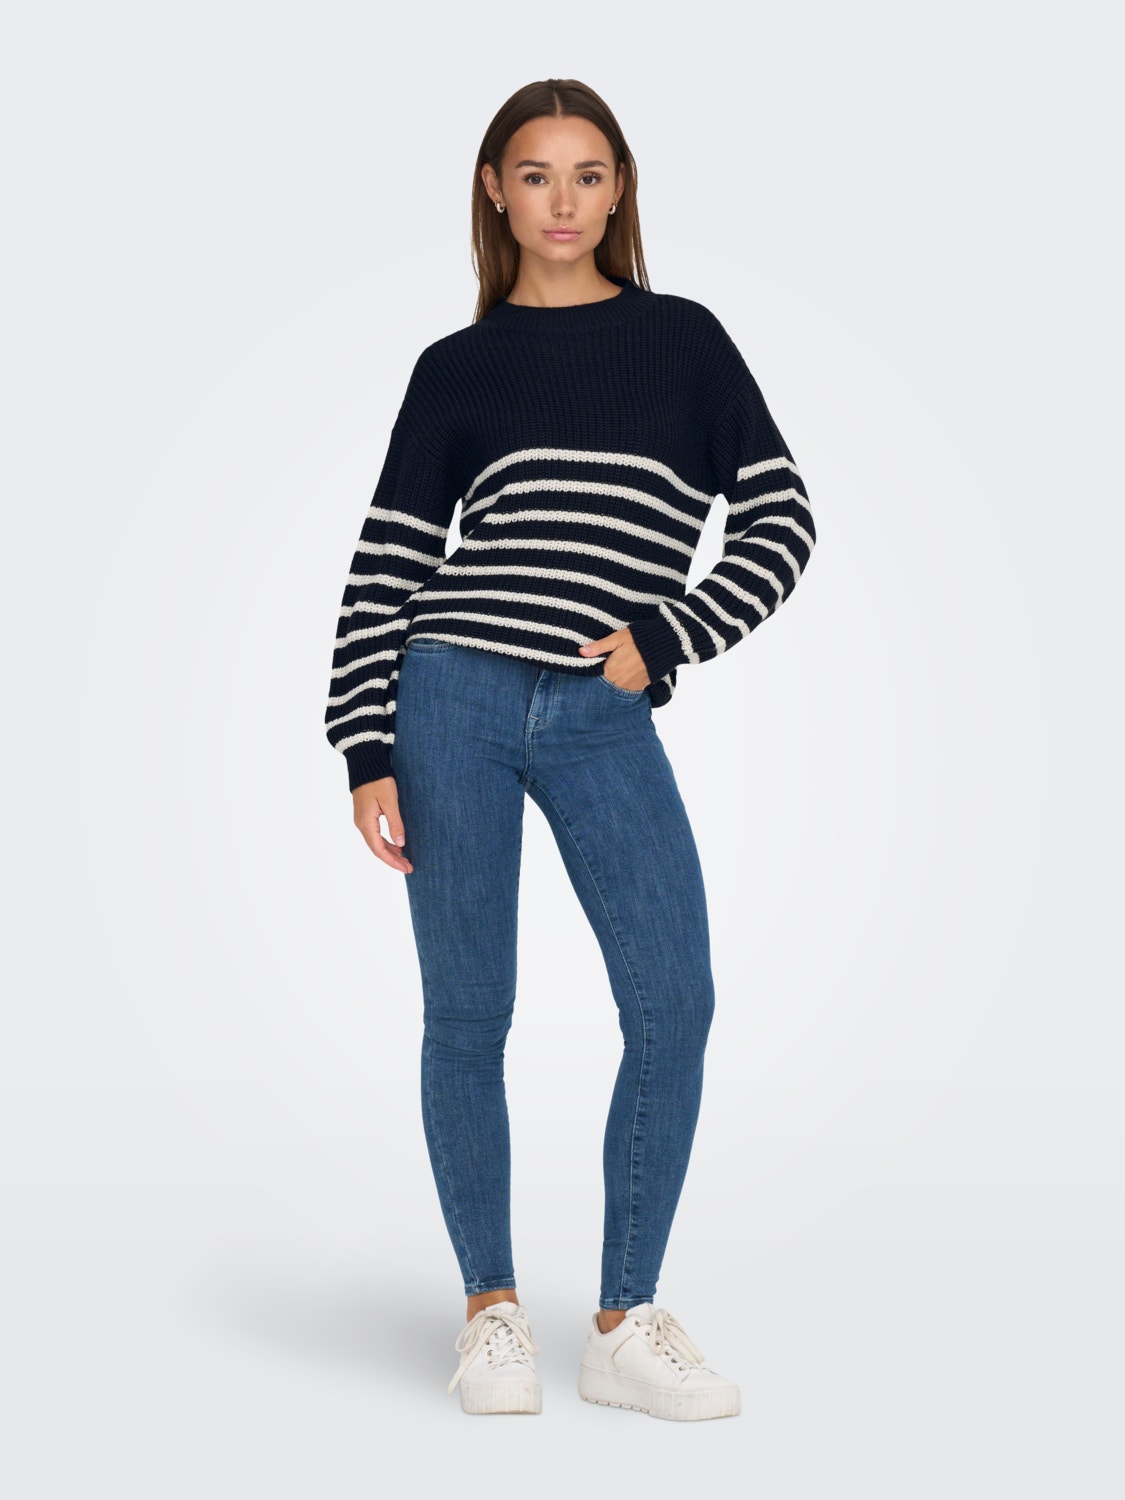 ONLY High neck Pullover -Sky Captain - 15302344